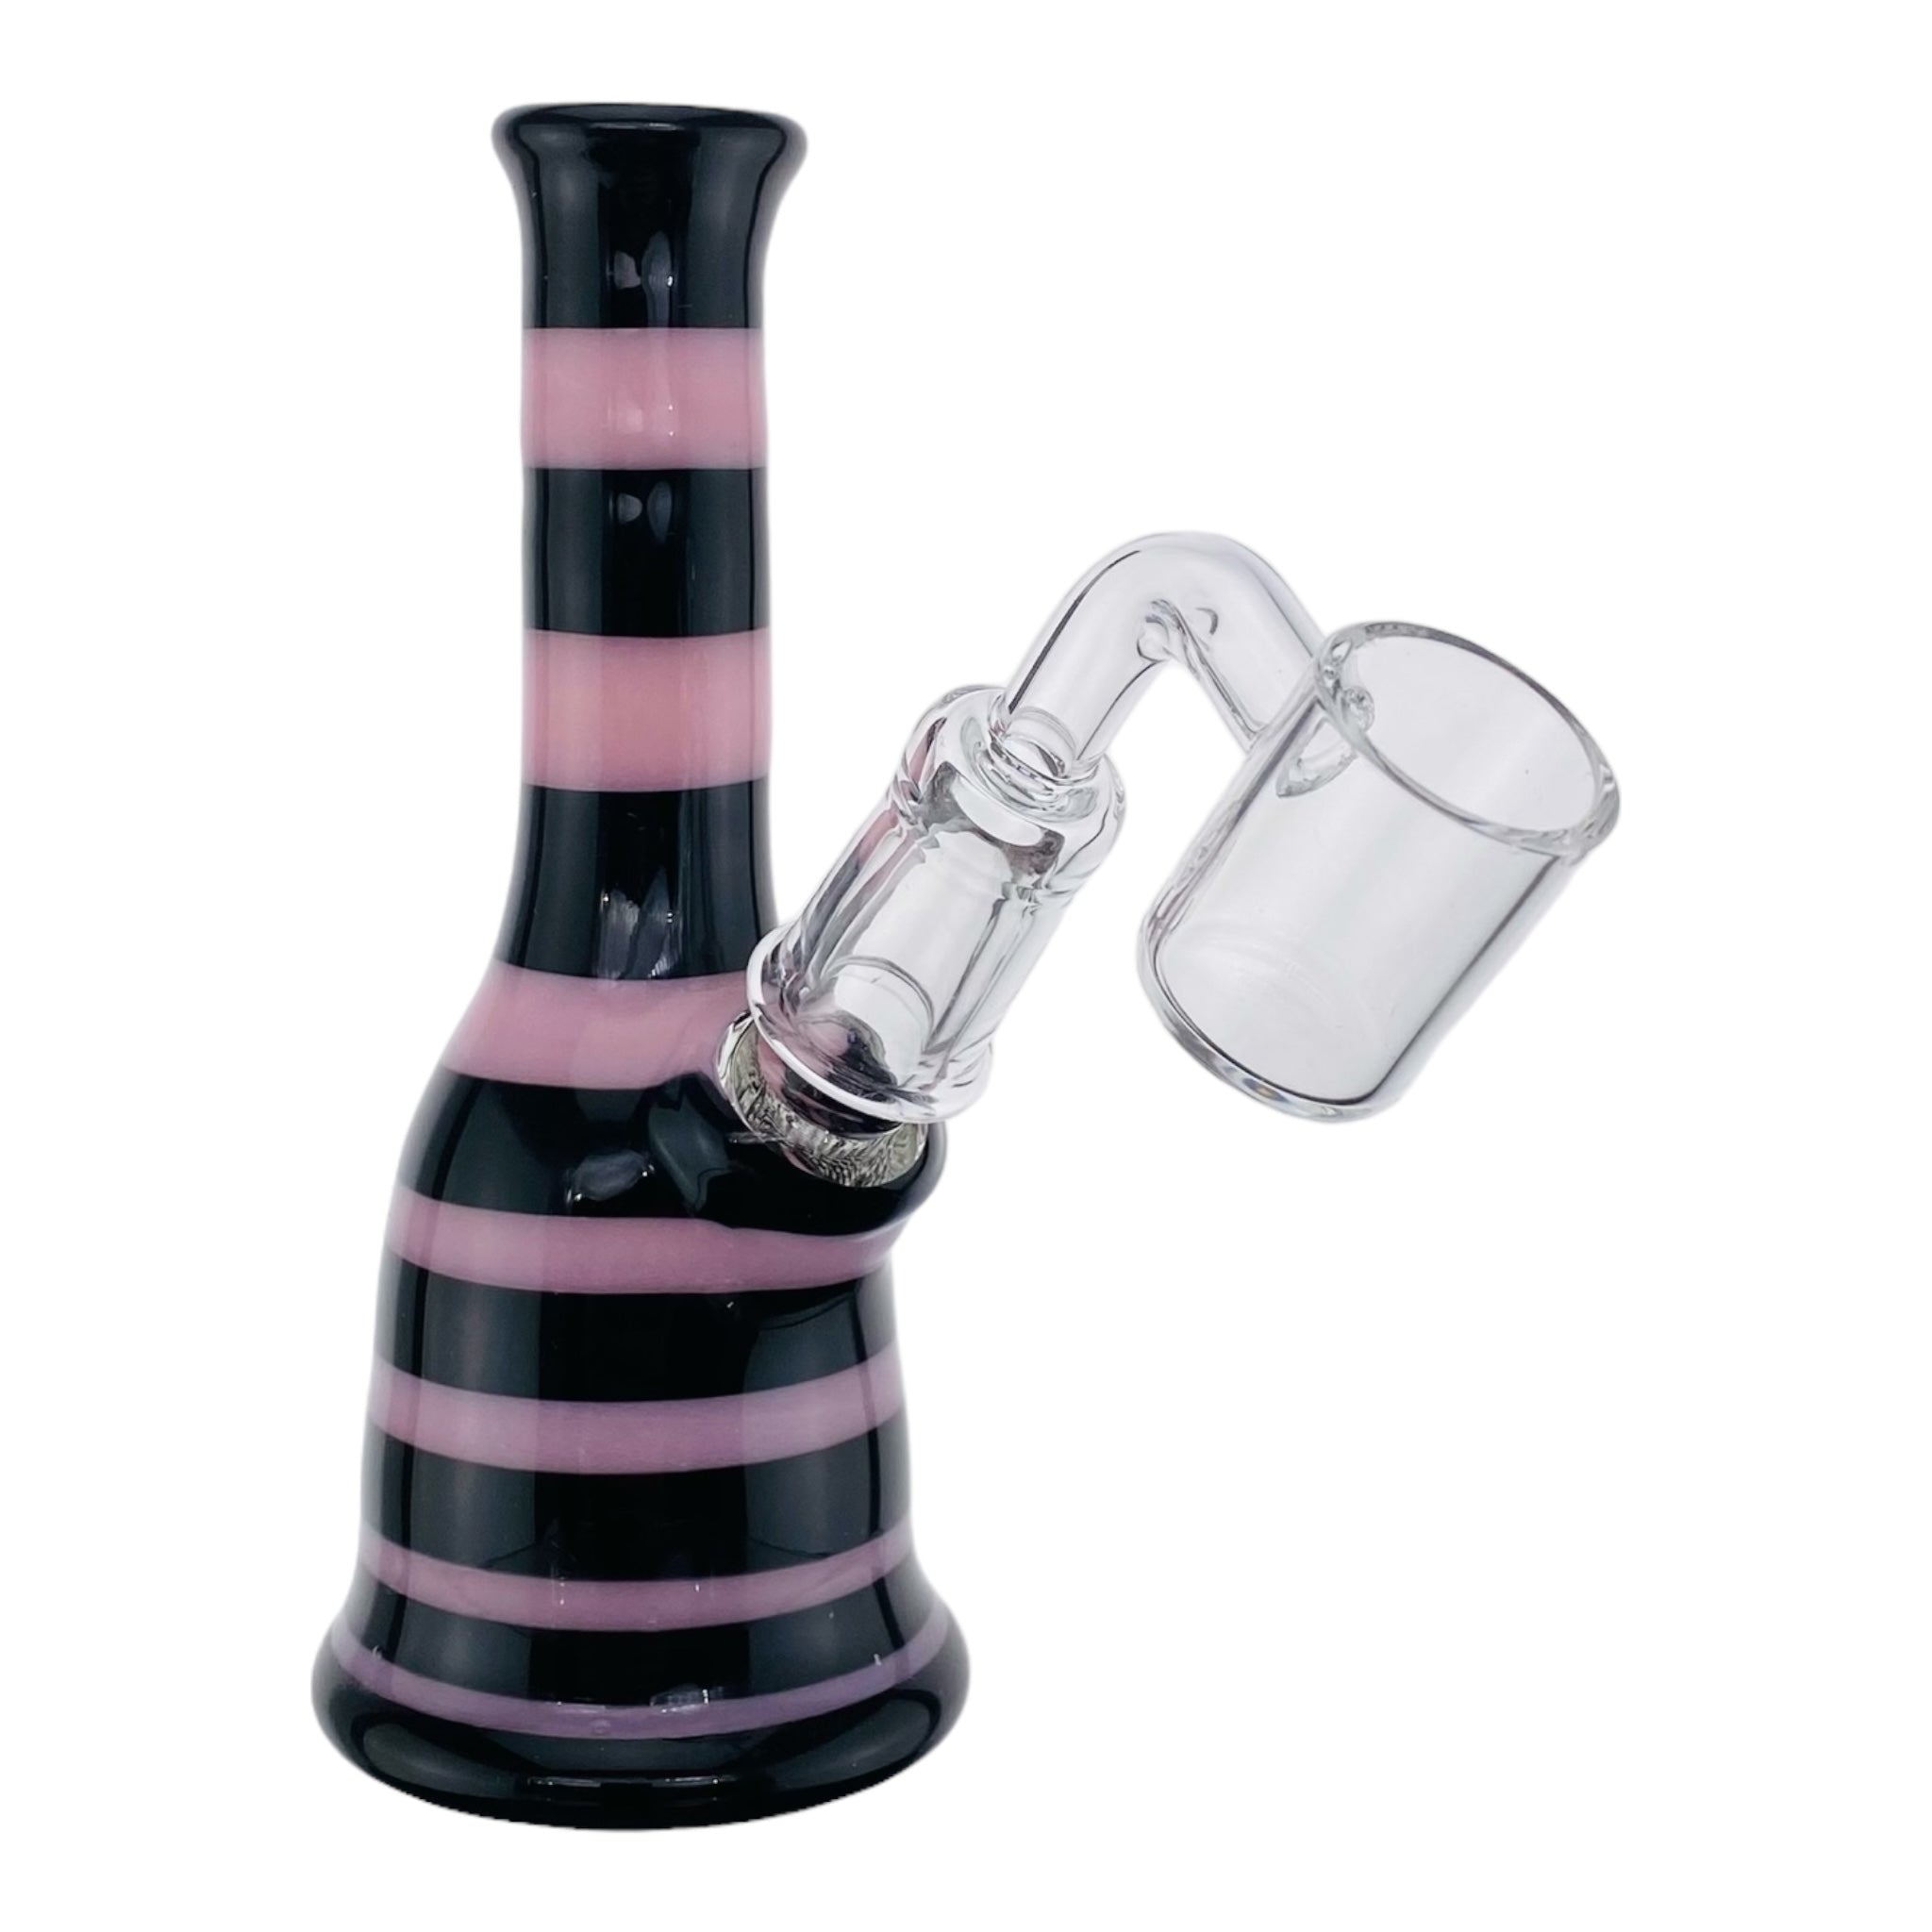 cute and girly heady glass Pink And Black Mini Custom Dab Rig for sale